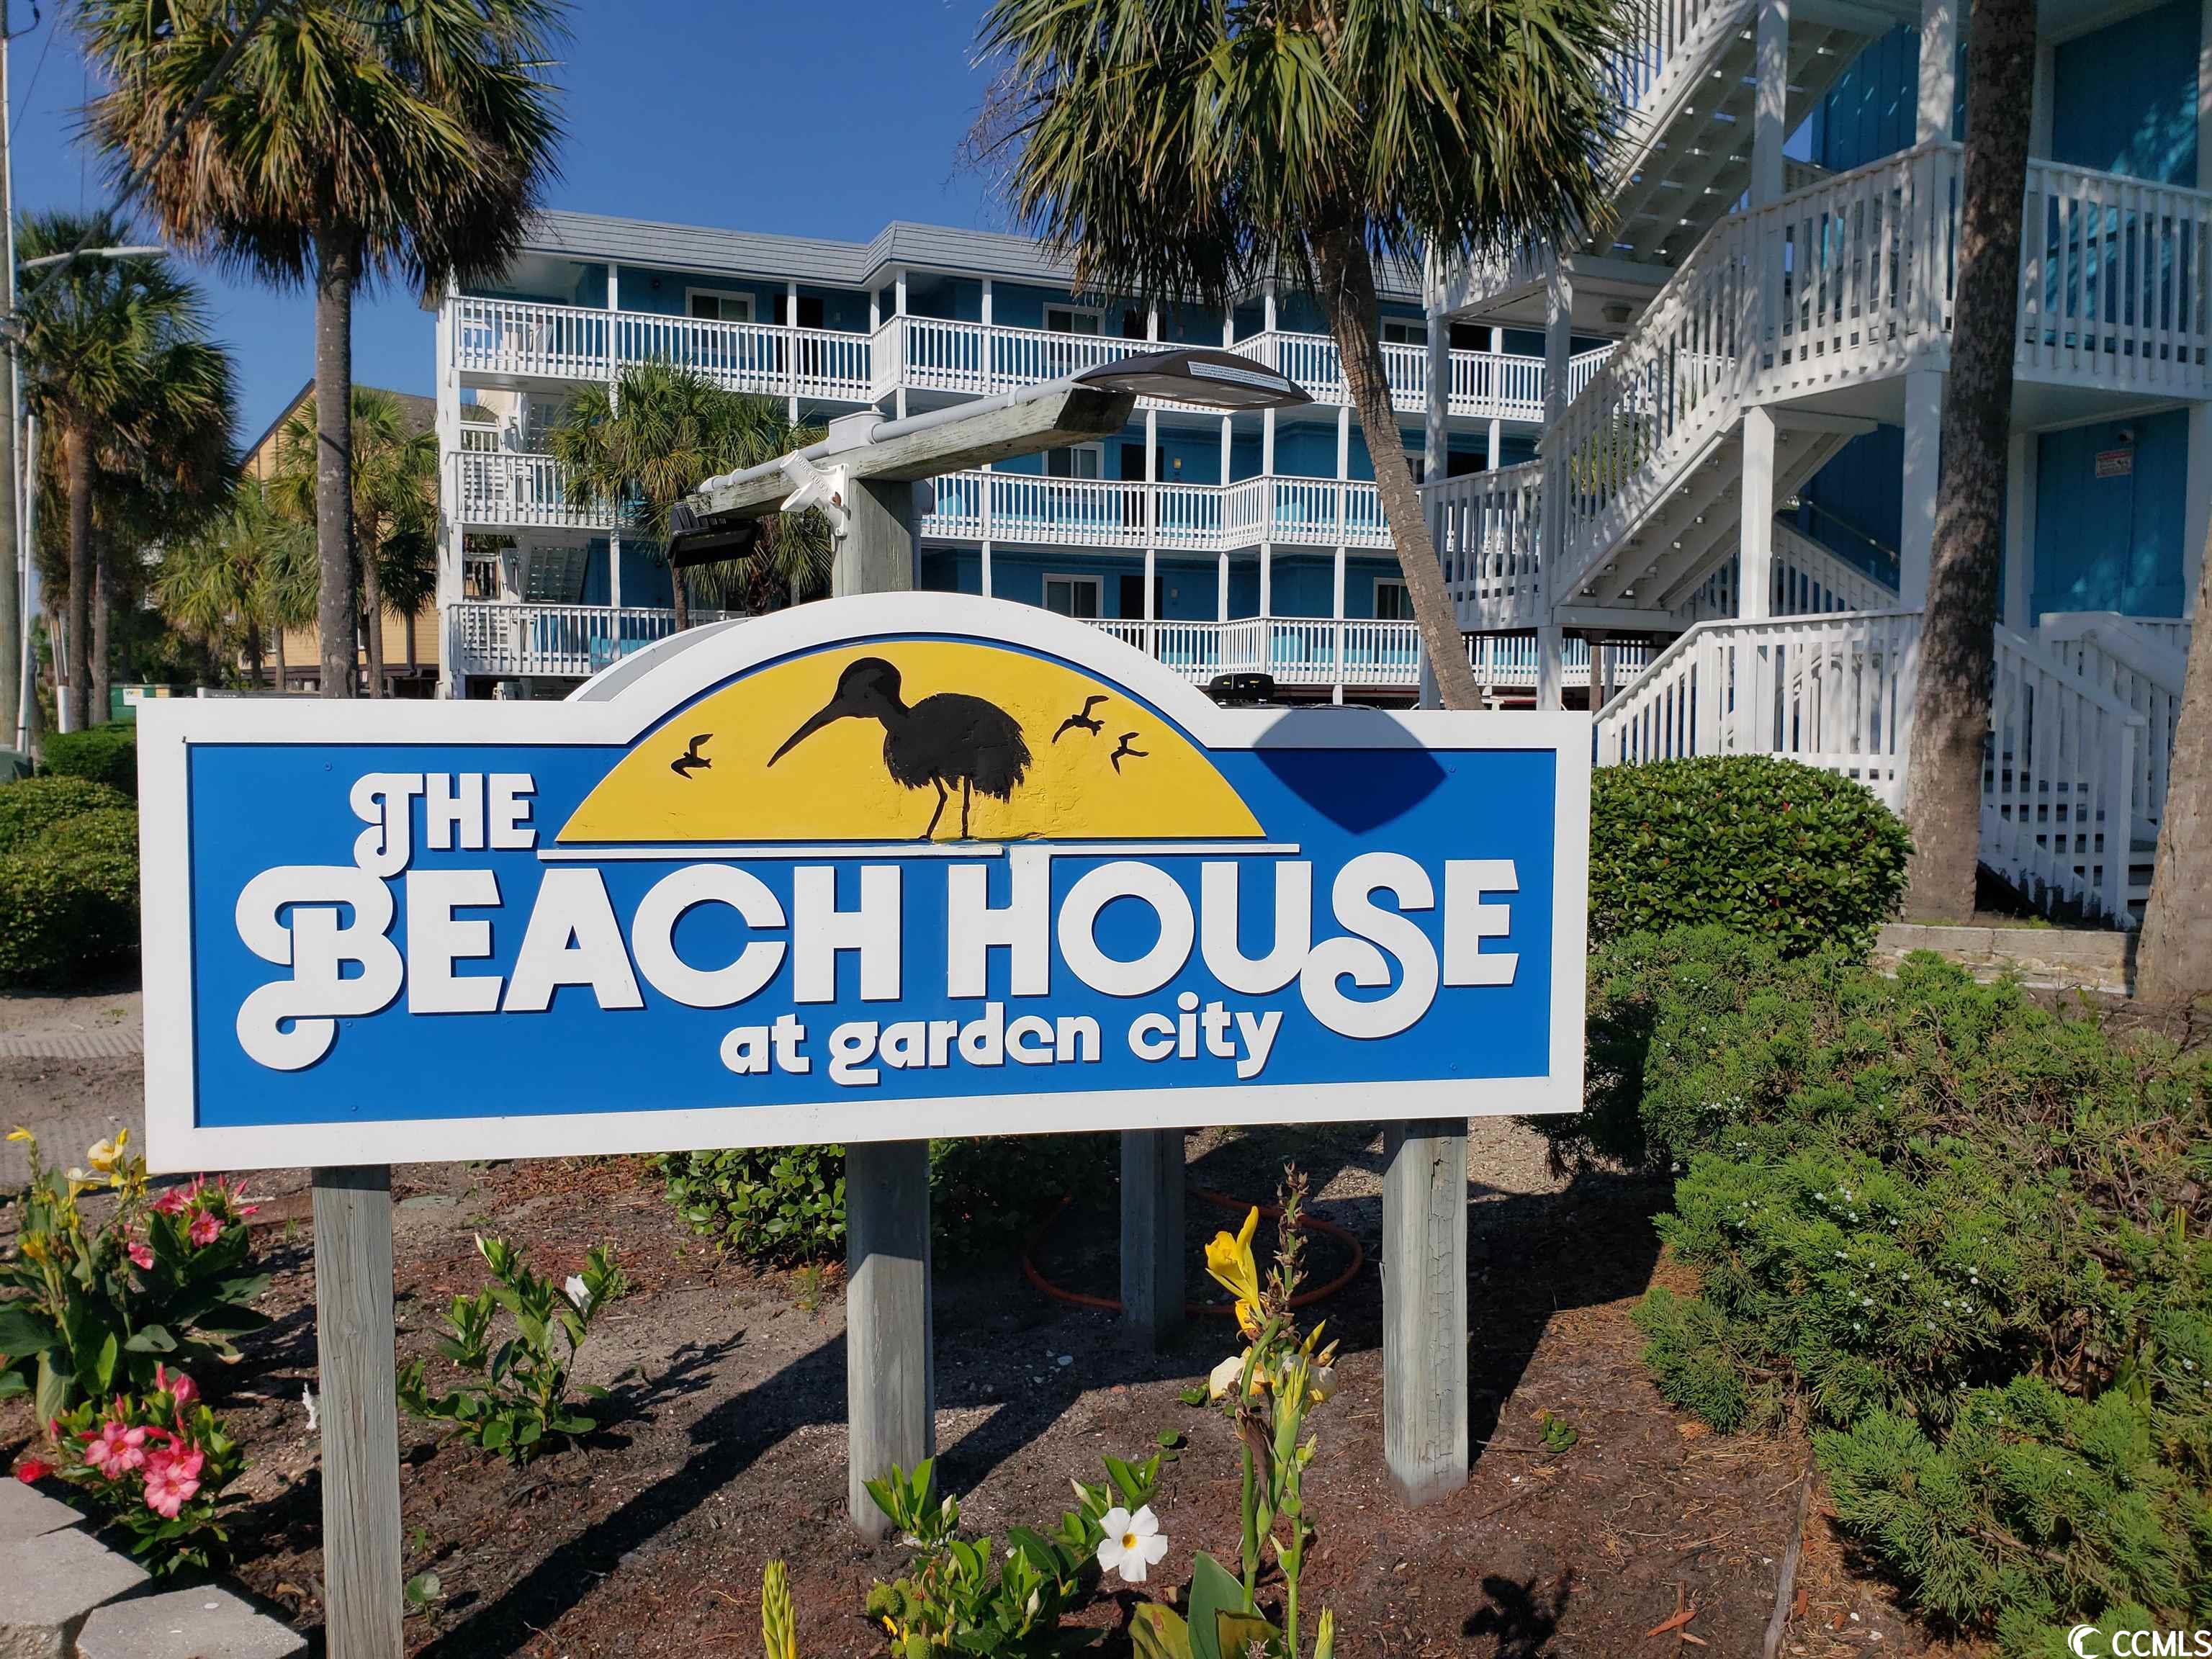 Your own place at the beach is now available! Beach House is a direct ocean front building with outstanding views of the Atlantic Ocean and beaches from all units. The condo features two bedrooms and two full baths with a laundry room. Large balcony with a sliding door off living room and door with glass for a view off of main bedroom. Sold completely furnished with very tasteful beach decor. The kitchen counter tops were replaced and upgraded on July 12th with quartz countertops! Great price for such a wonderful ocean view. Pool, sun deck and direct beach access on property. Just a comfortable walk to the Garden City Pier and Sam's corner!